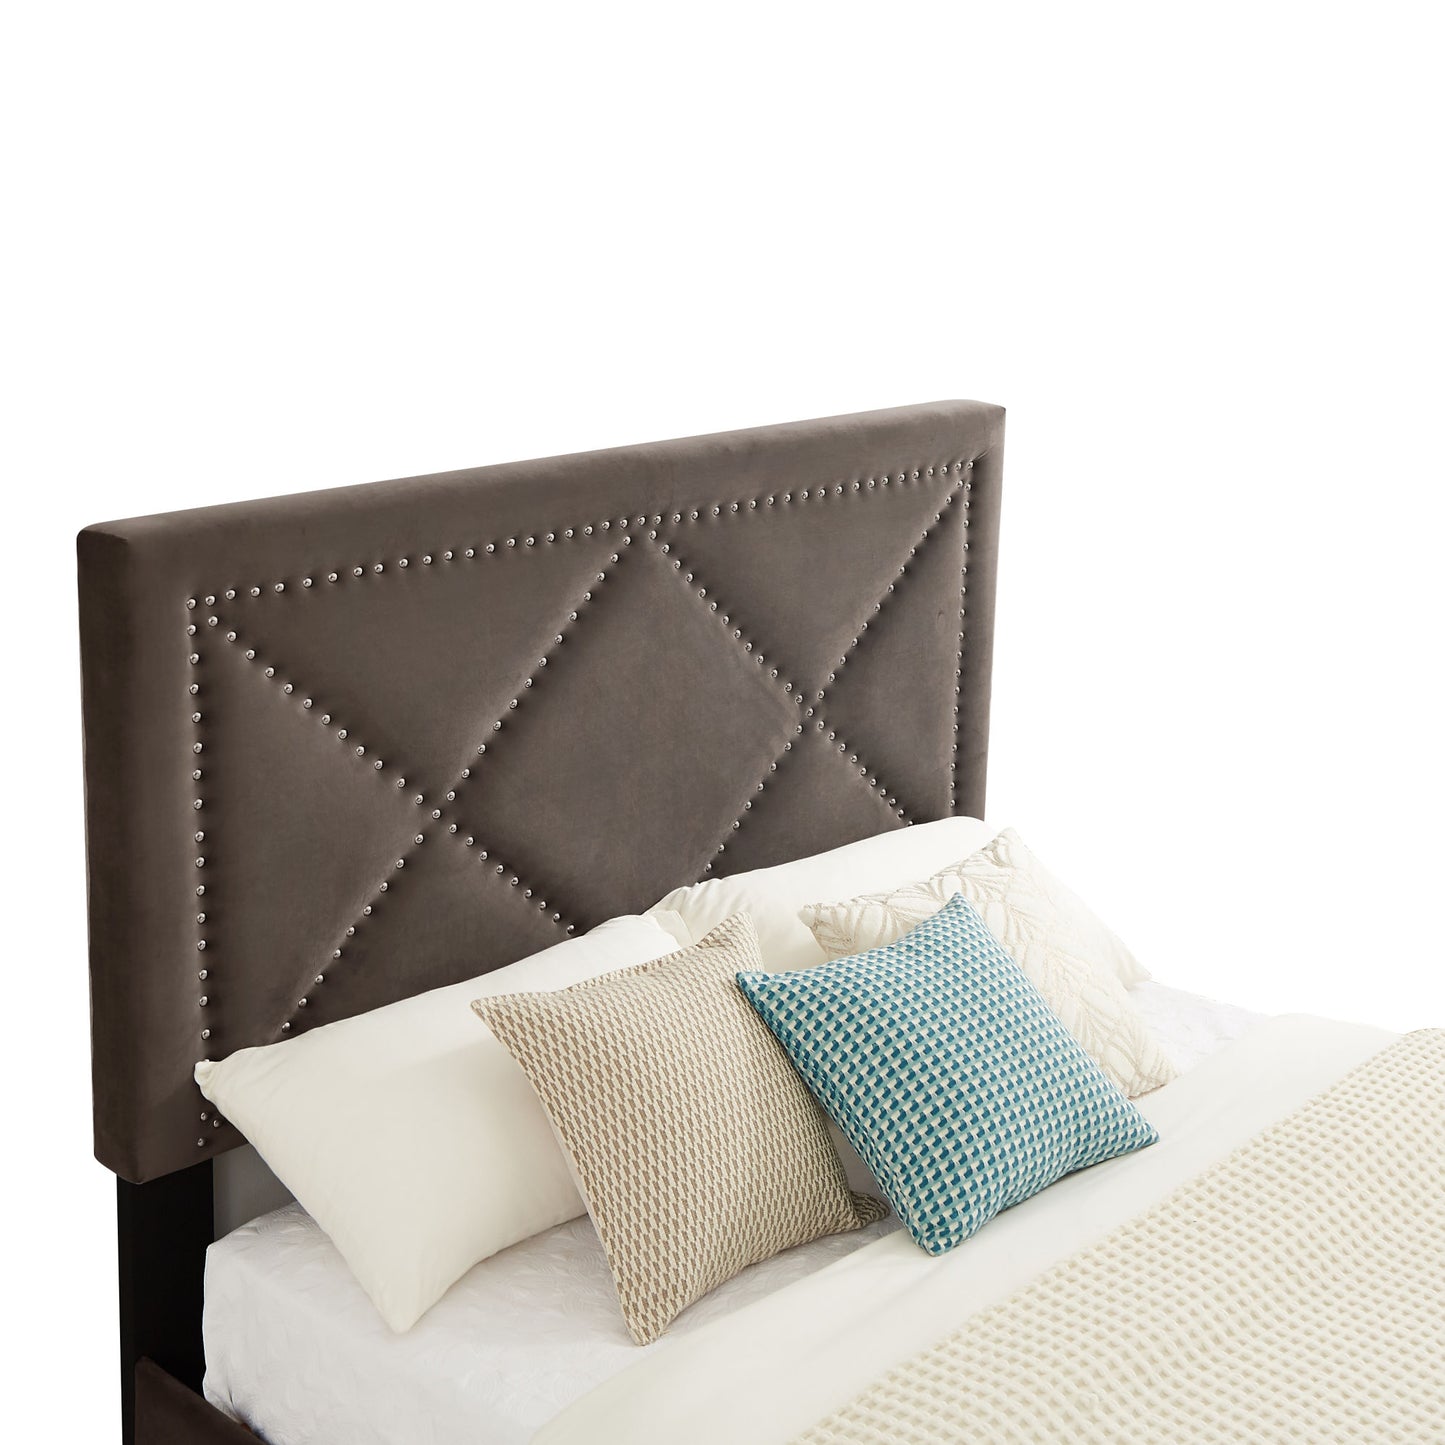 beautiful brass studs adorn the headboard, strong wooden slats + metal legs with electroplate